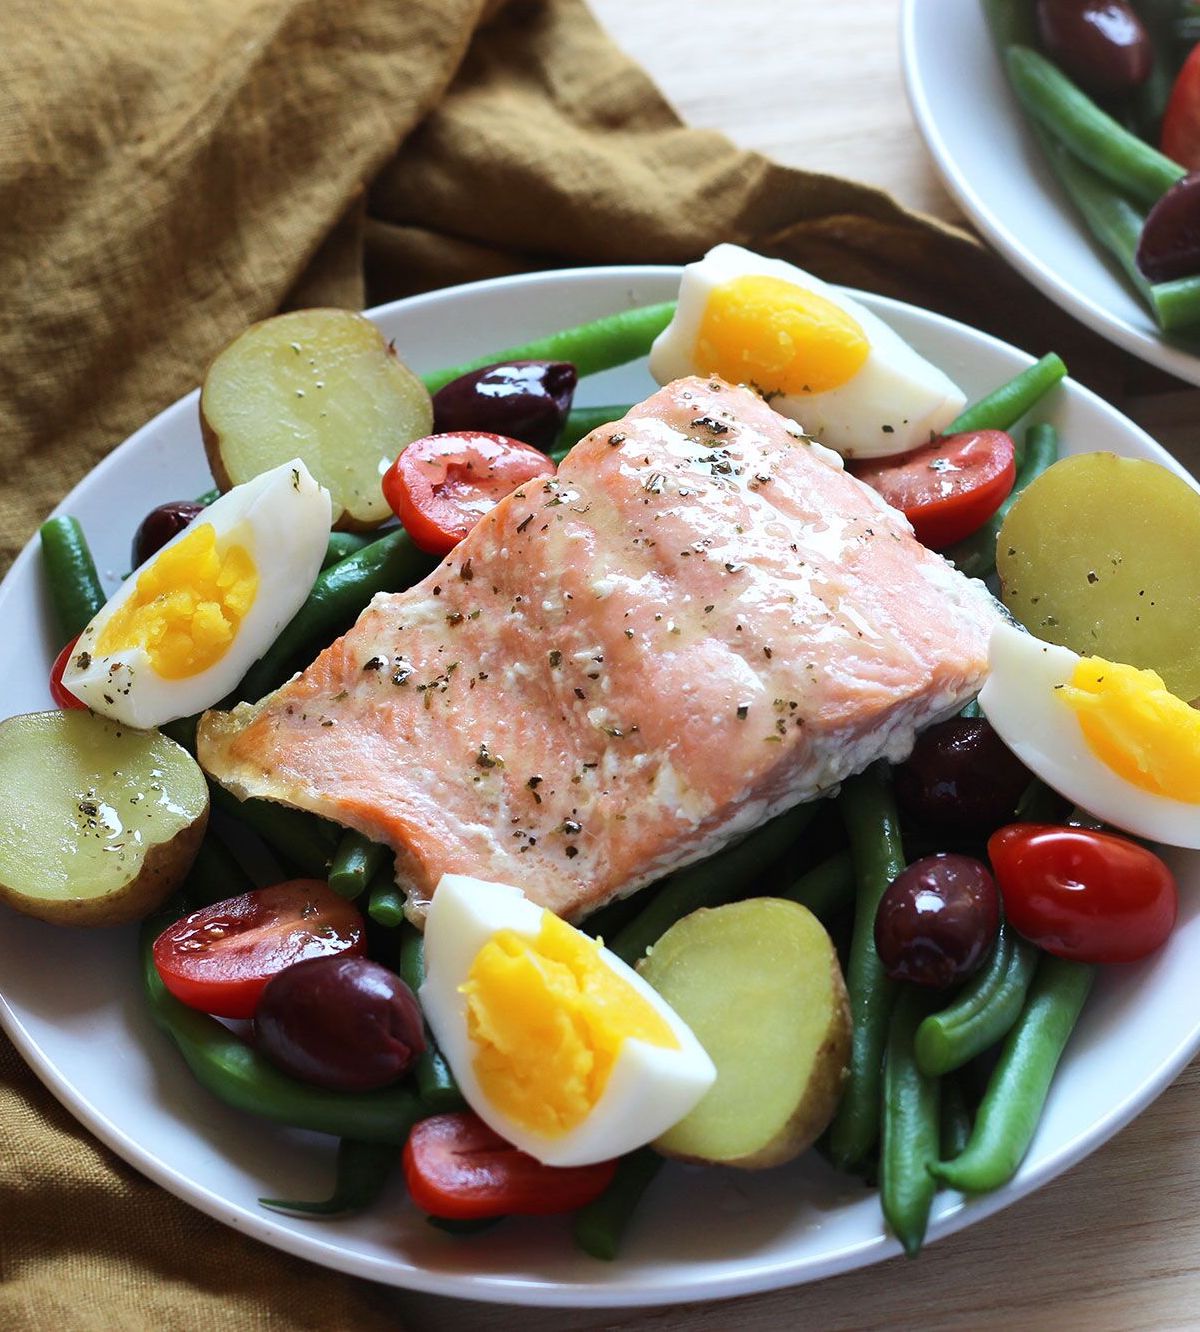 10 Mediterranean Diet Approved Recipes to Add to Your Meal Plan - Salmon Nicoise Salad